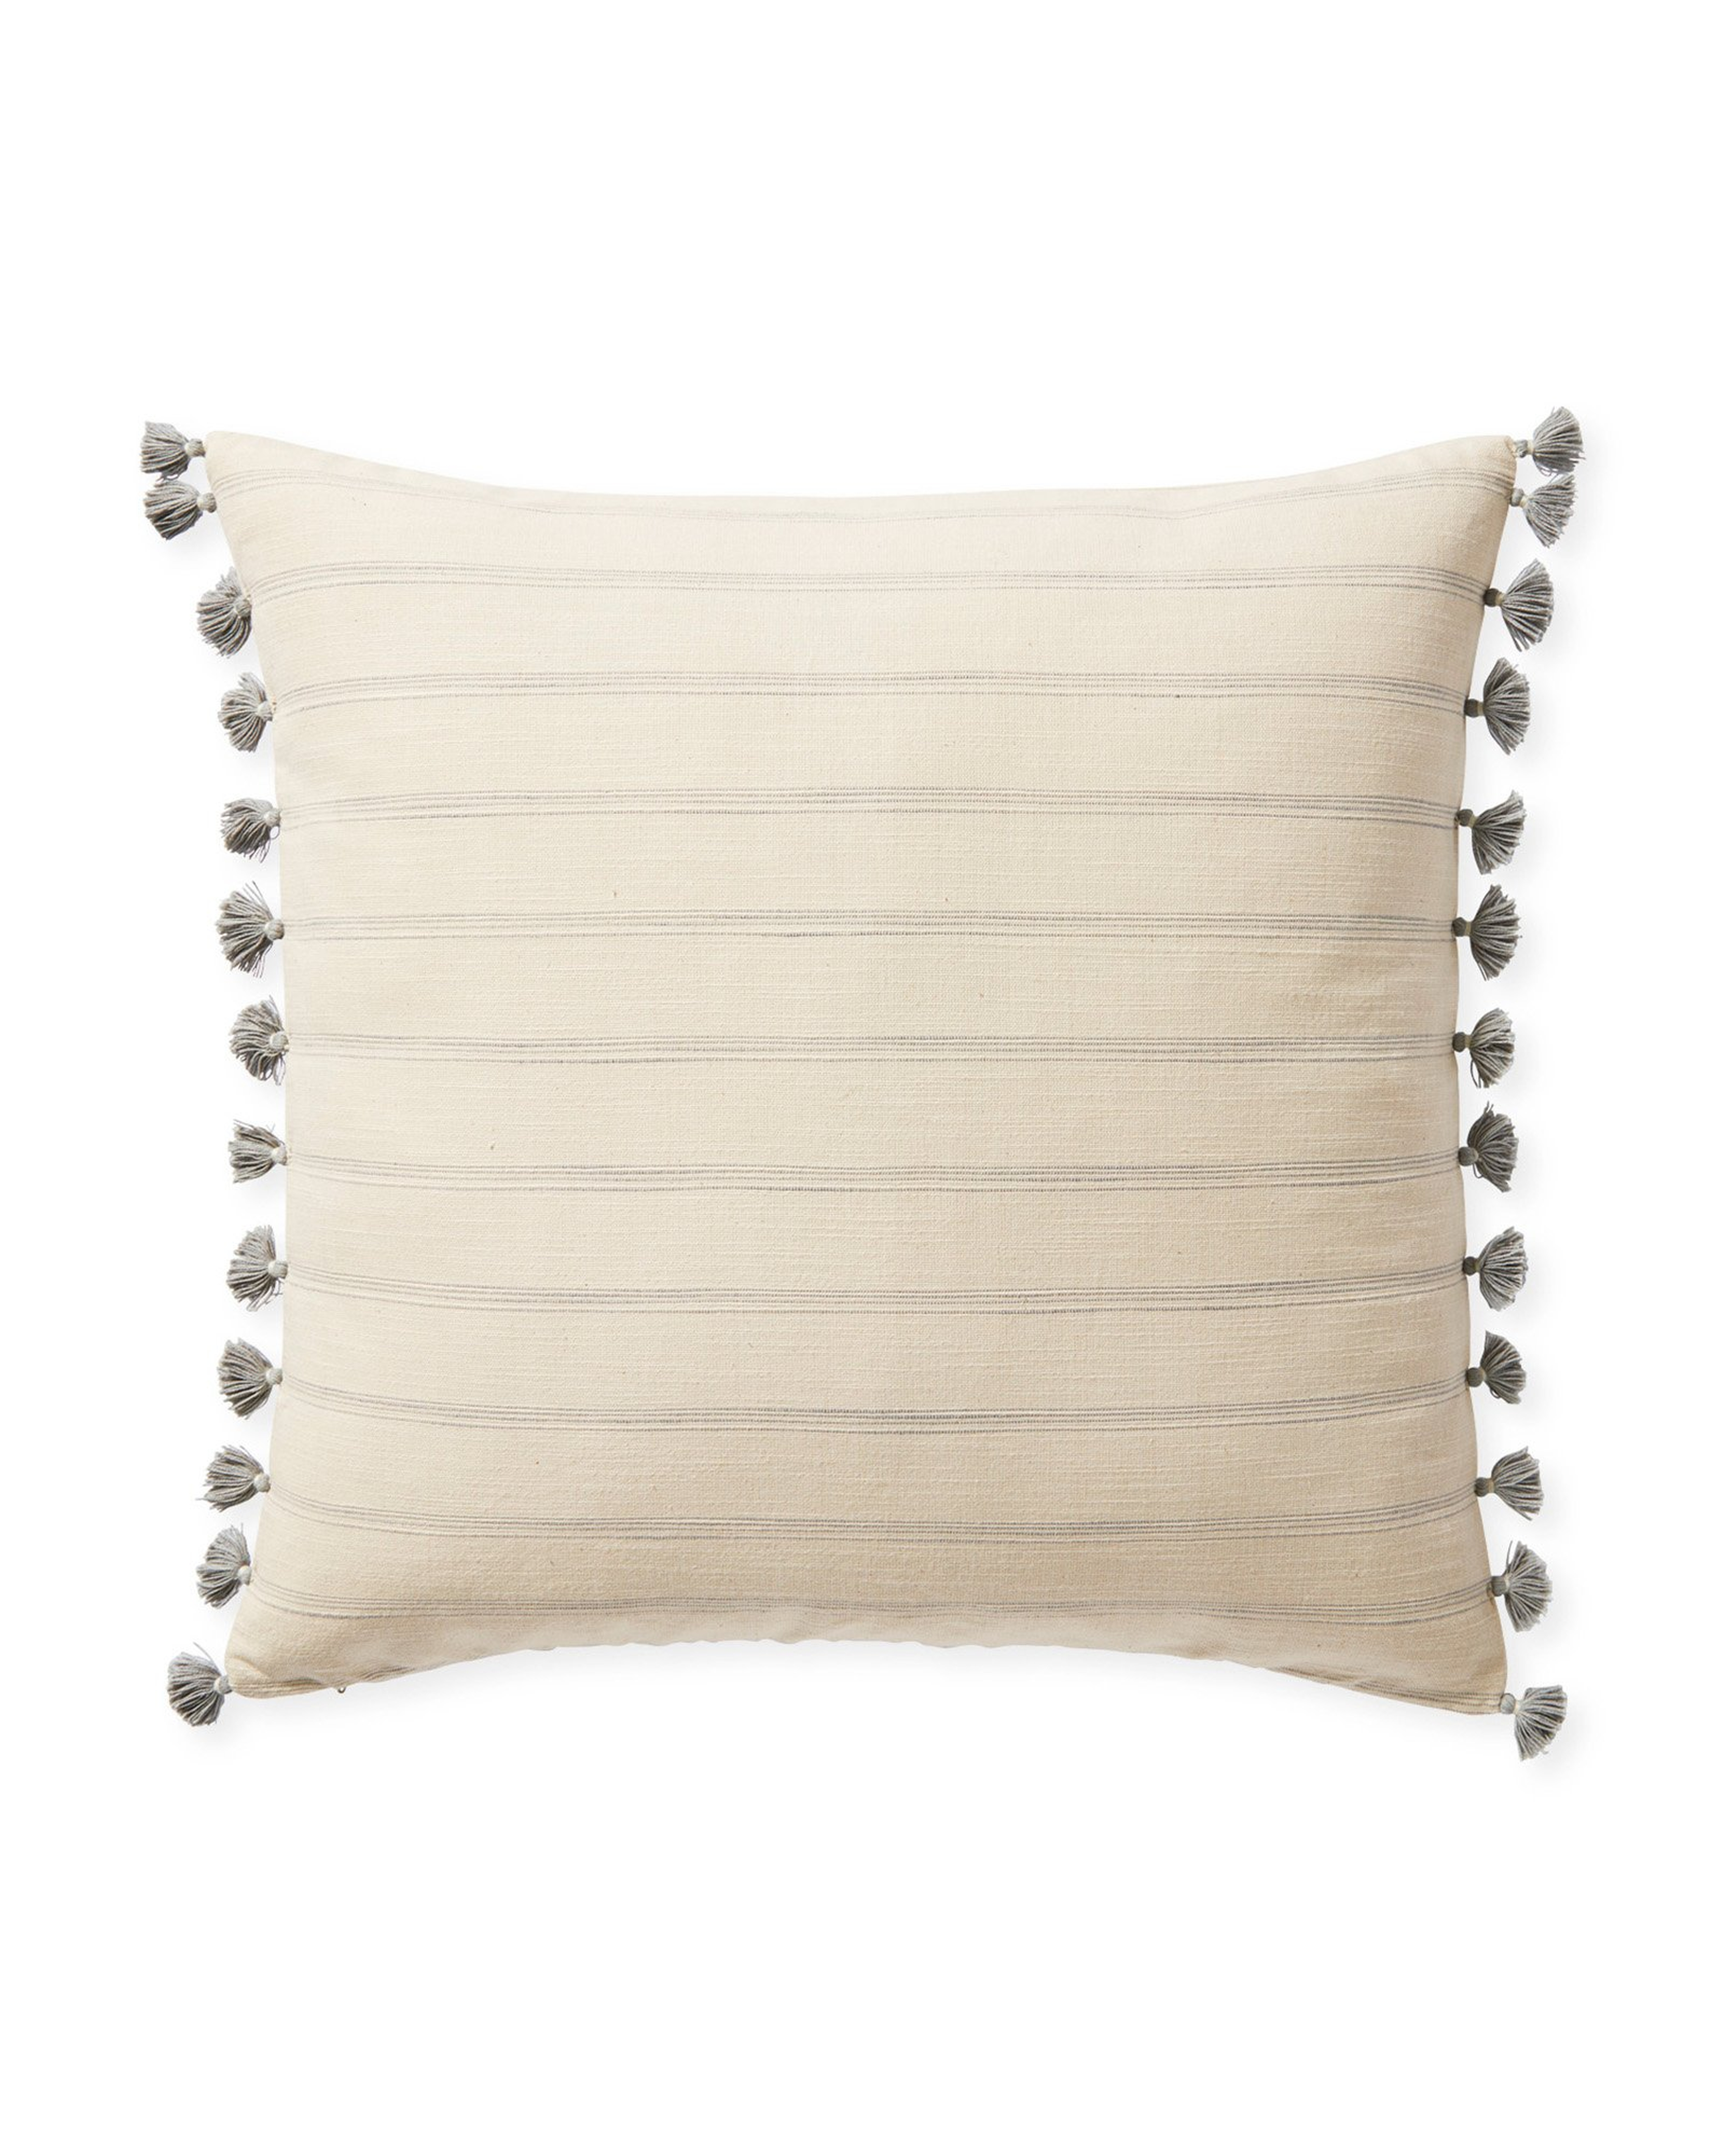 Alsworth 22" SQ Pillow Cover - Fog - Insert sold separately - Serena and Lily